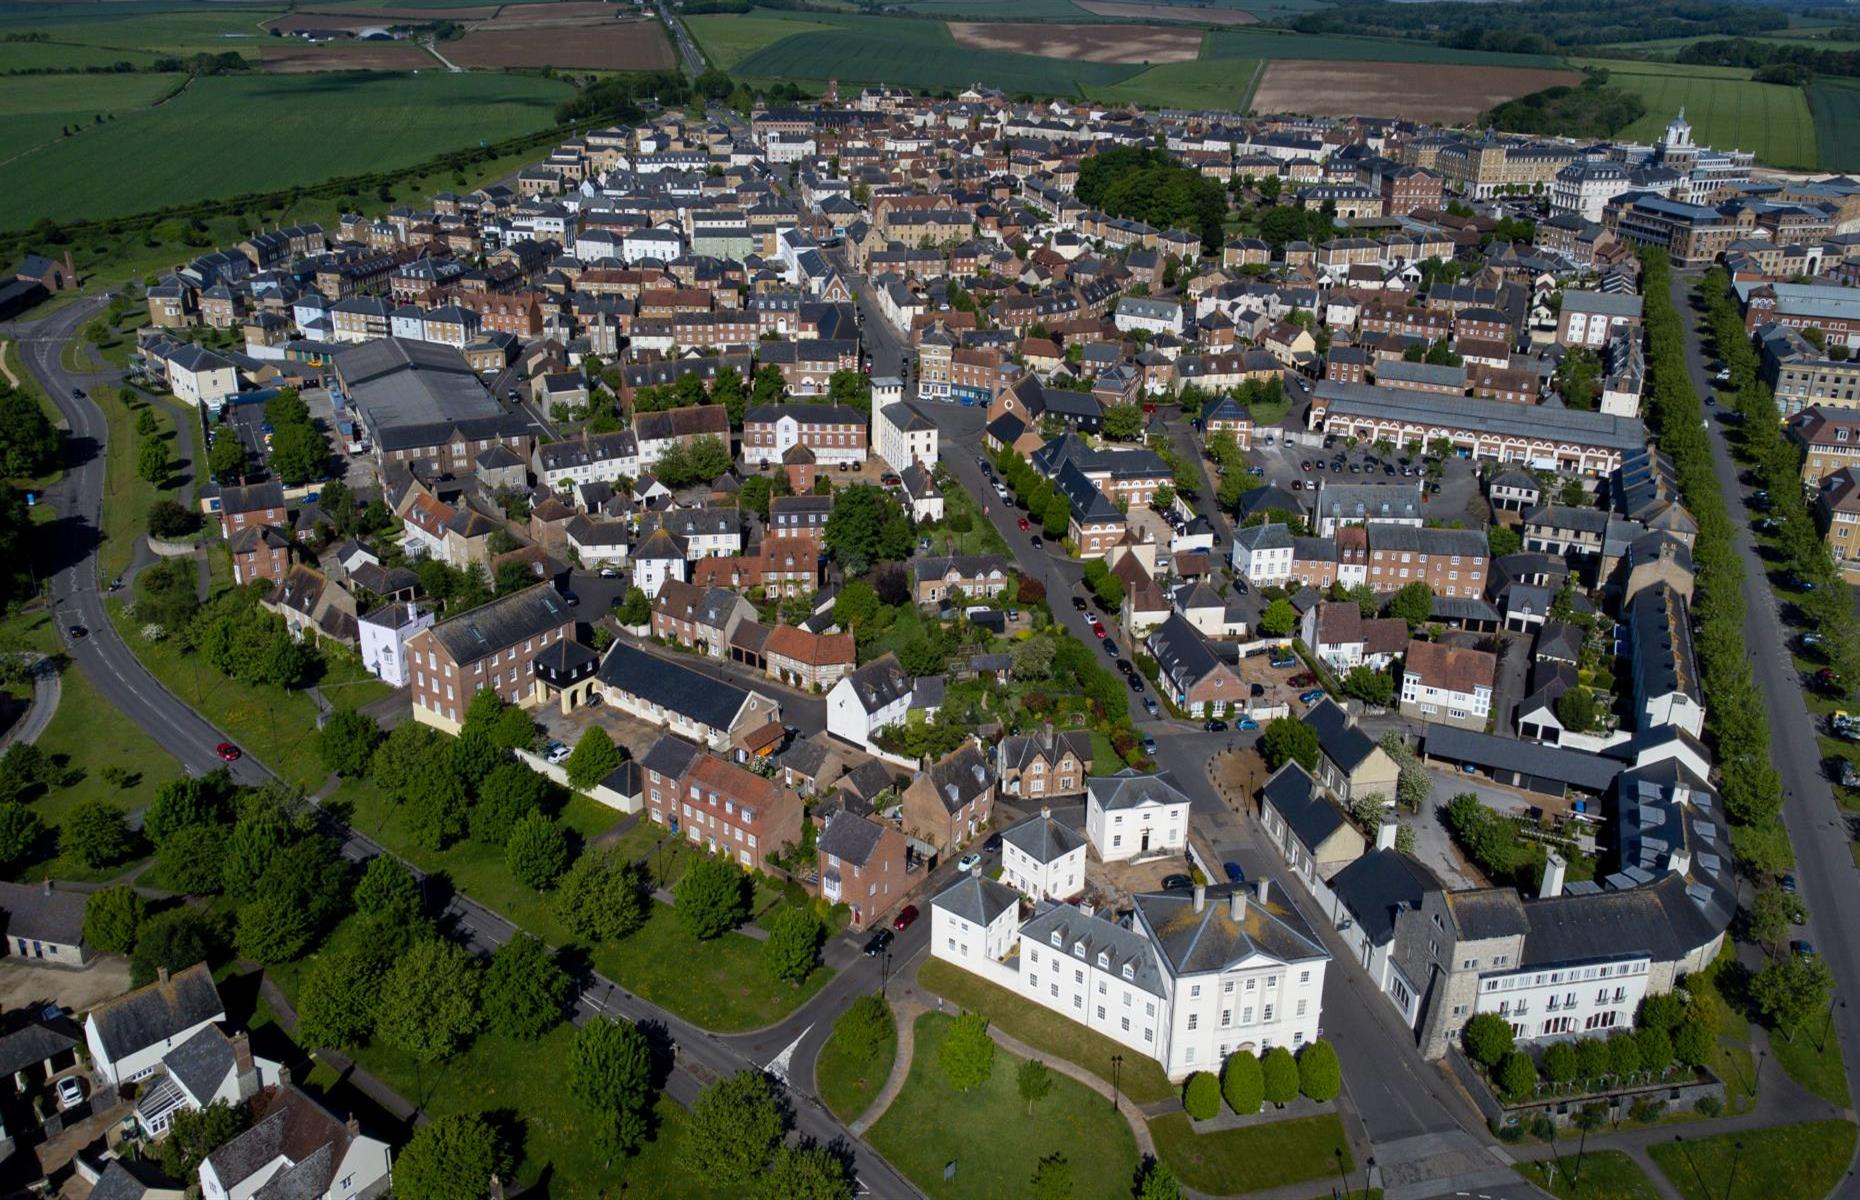 <p>Due for completion in 2027, construction on the 400-acre development began in 1993. Today, <a href="https://duchyofcornwall.org/poundbury.html">Poundbury</a> is home to more than 4,000 people, with another 2,000 working in its shops, offices, factories and cafes. Now that King Charles has ascended the throne, the new Duke of Cornwall, <a href="https://www.loveproperty.com/gallerylist/144184/prince-william-and-kate-middletons-homes-from-kensington-palace-to-adelaid">Prince William</a>, will take the reins. But where did it all begin, and why did the King decide to build his own town?</p>